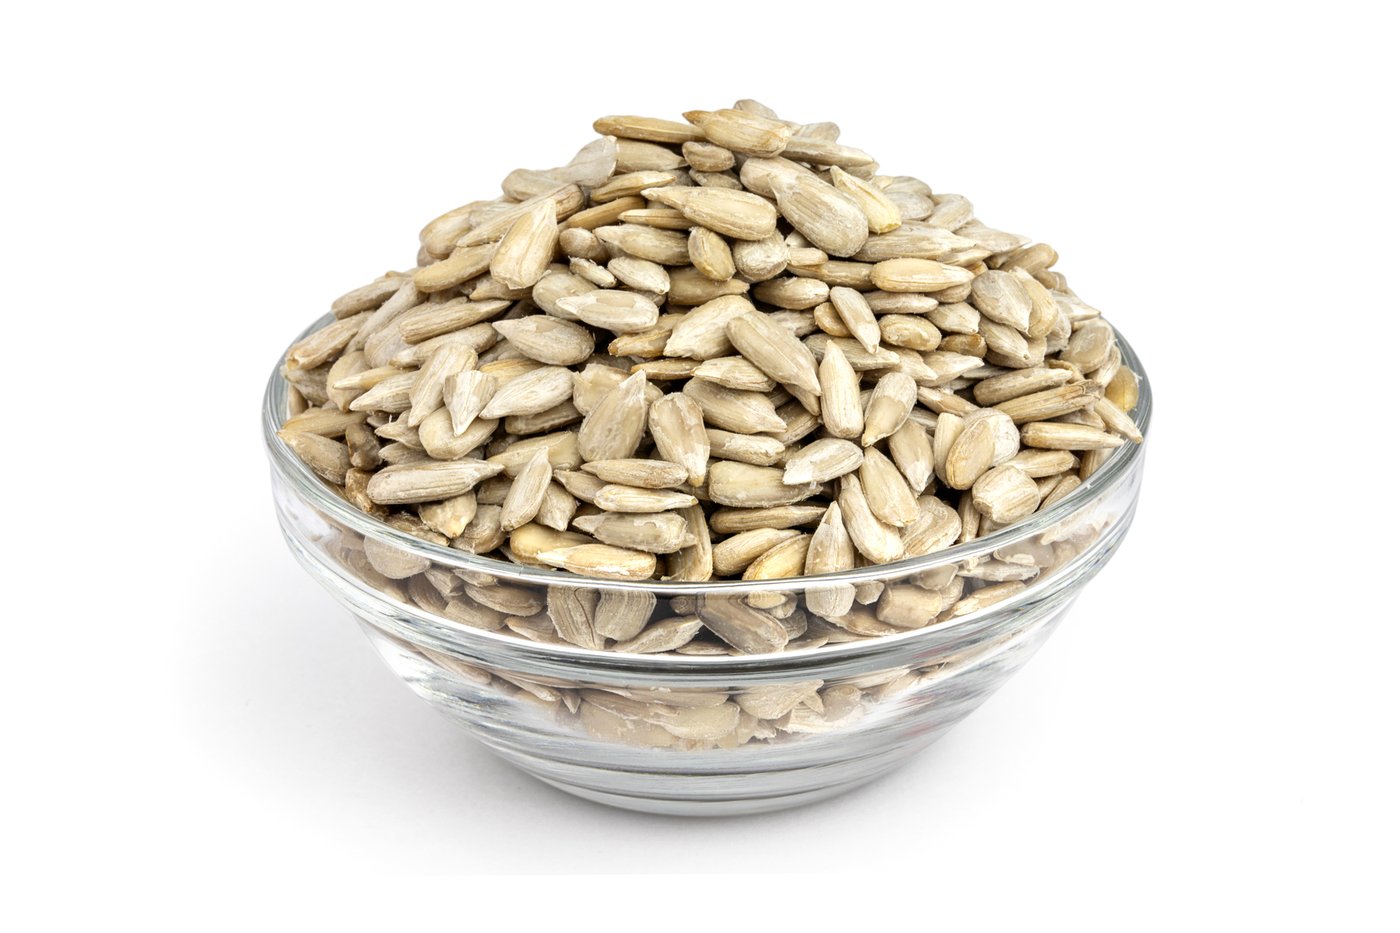 Raw Sunflower Seeds (No Shell) image zoom